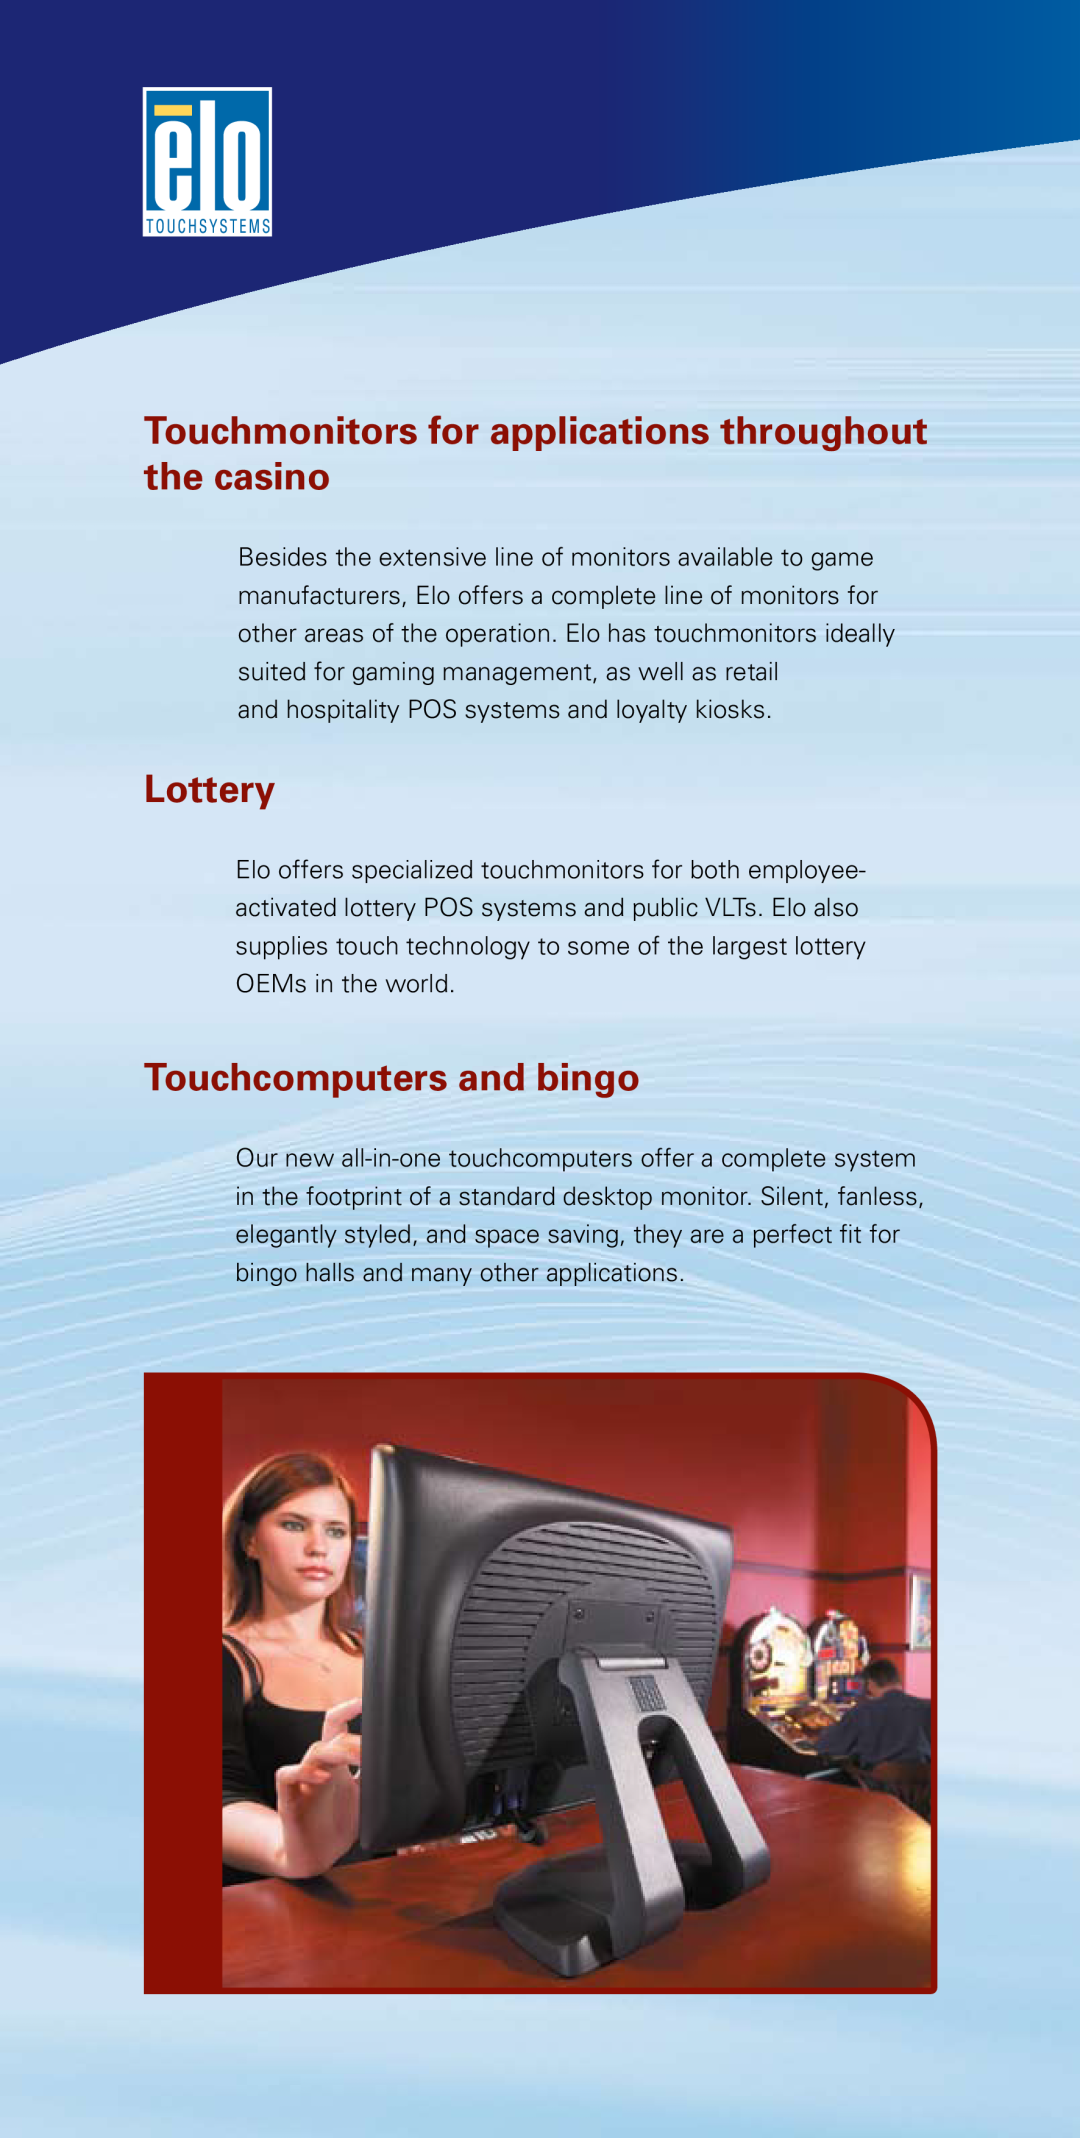 Elo TouchSystems Tyco manual Touchmonitors for applications throughout the casino, Lottery, Touchcomputers and bingo 